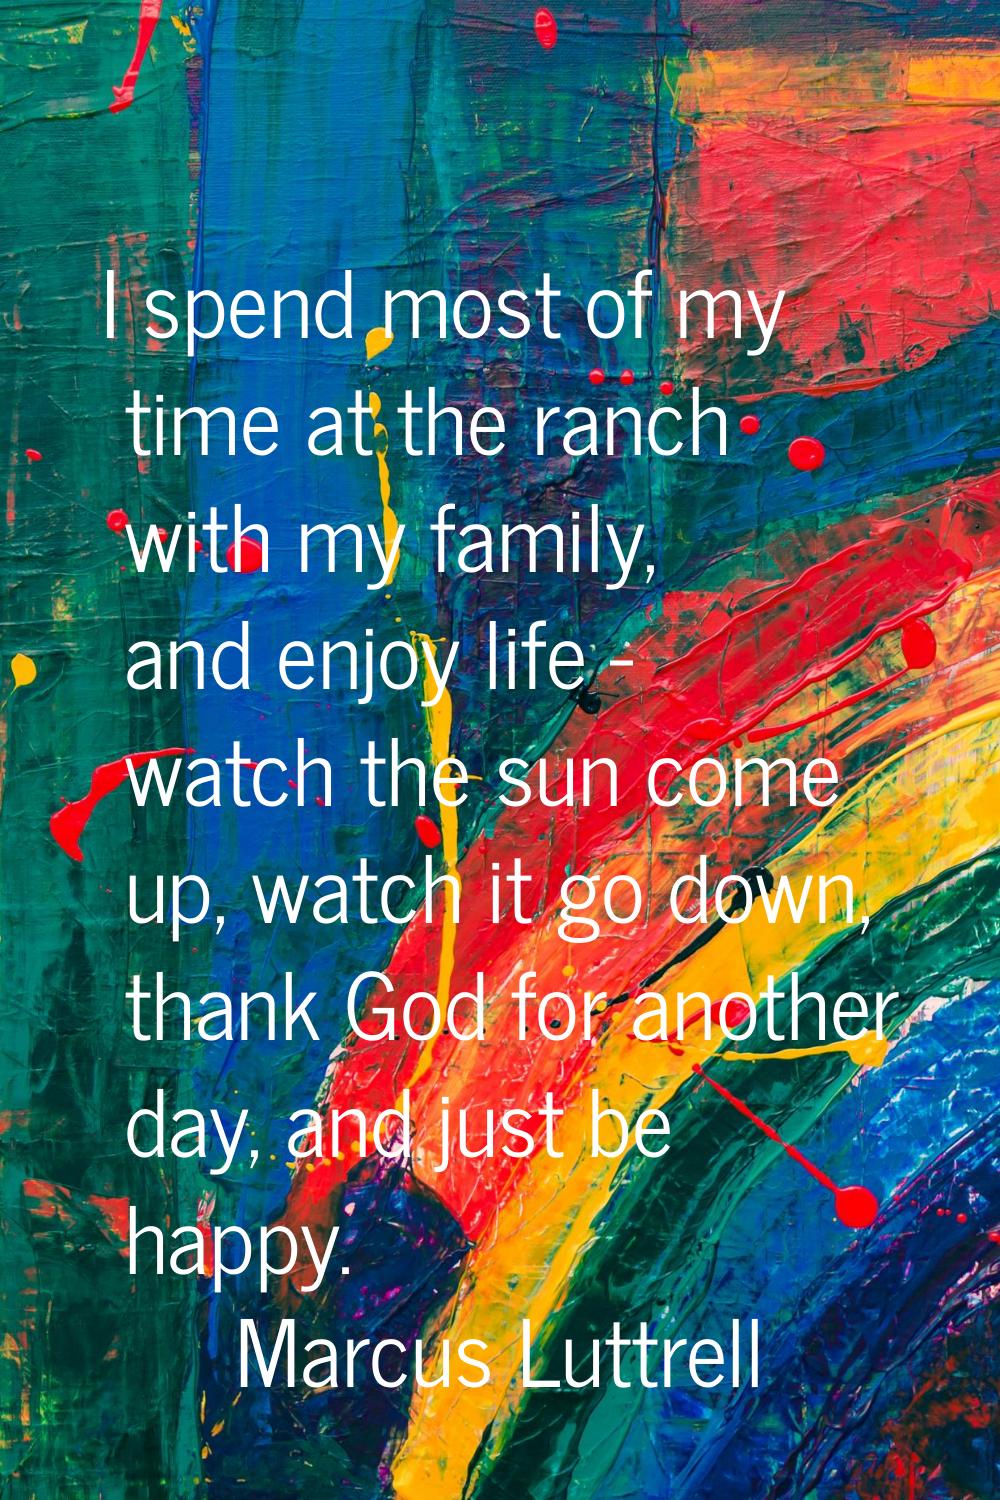 I spend most of my time at the ranch with my family, and enjoy life - watch the sun come up, watch 